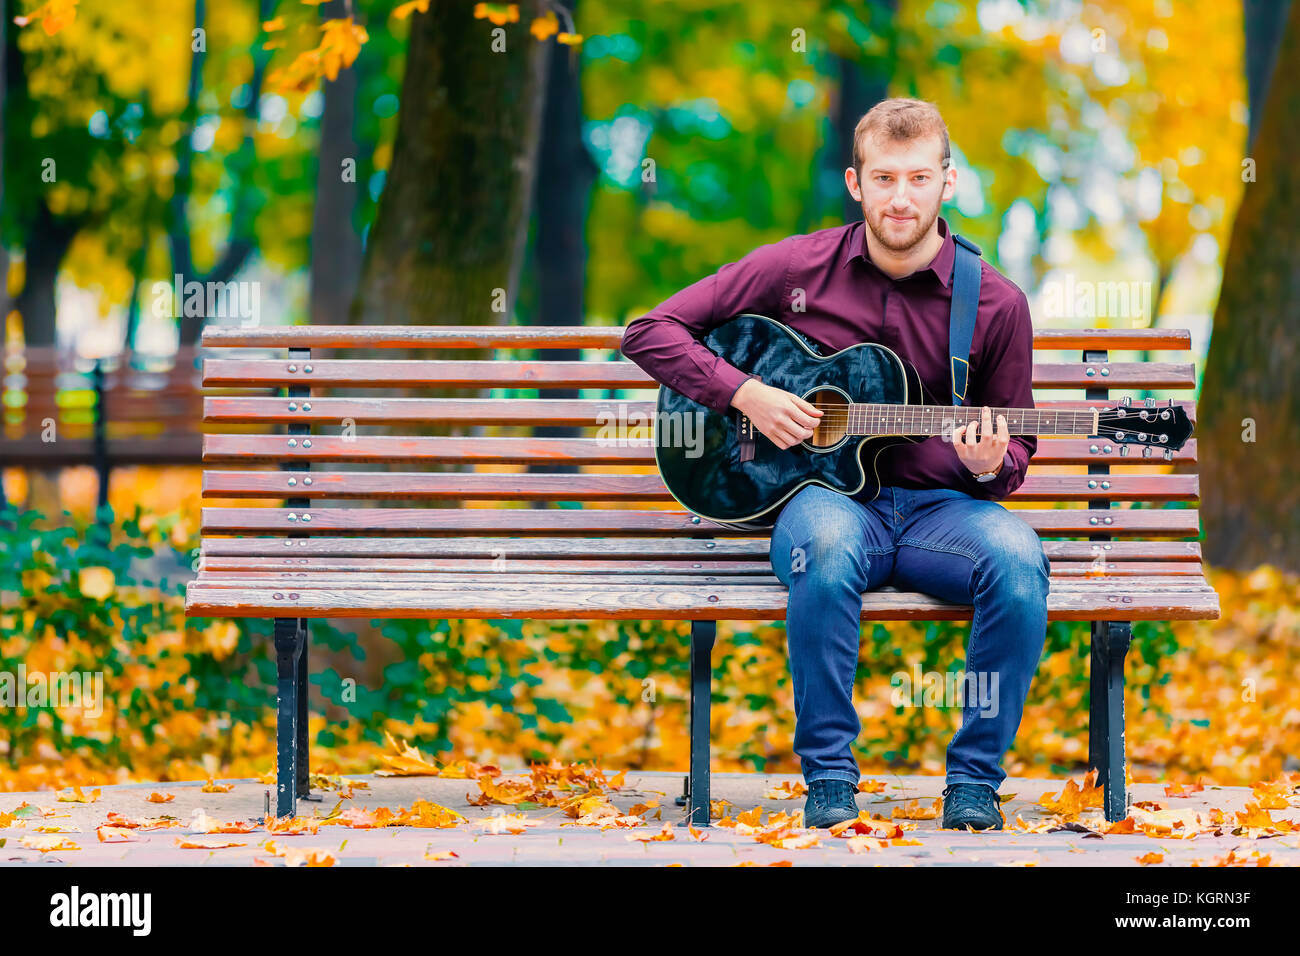 Young man sitting on bench and playing acoustic guitar in city park Stock Photo